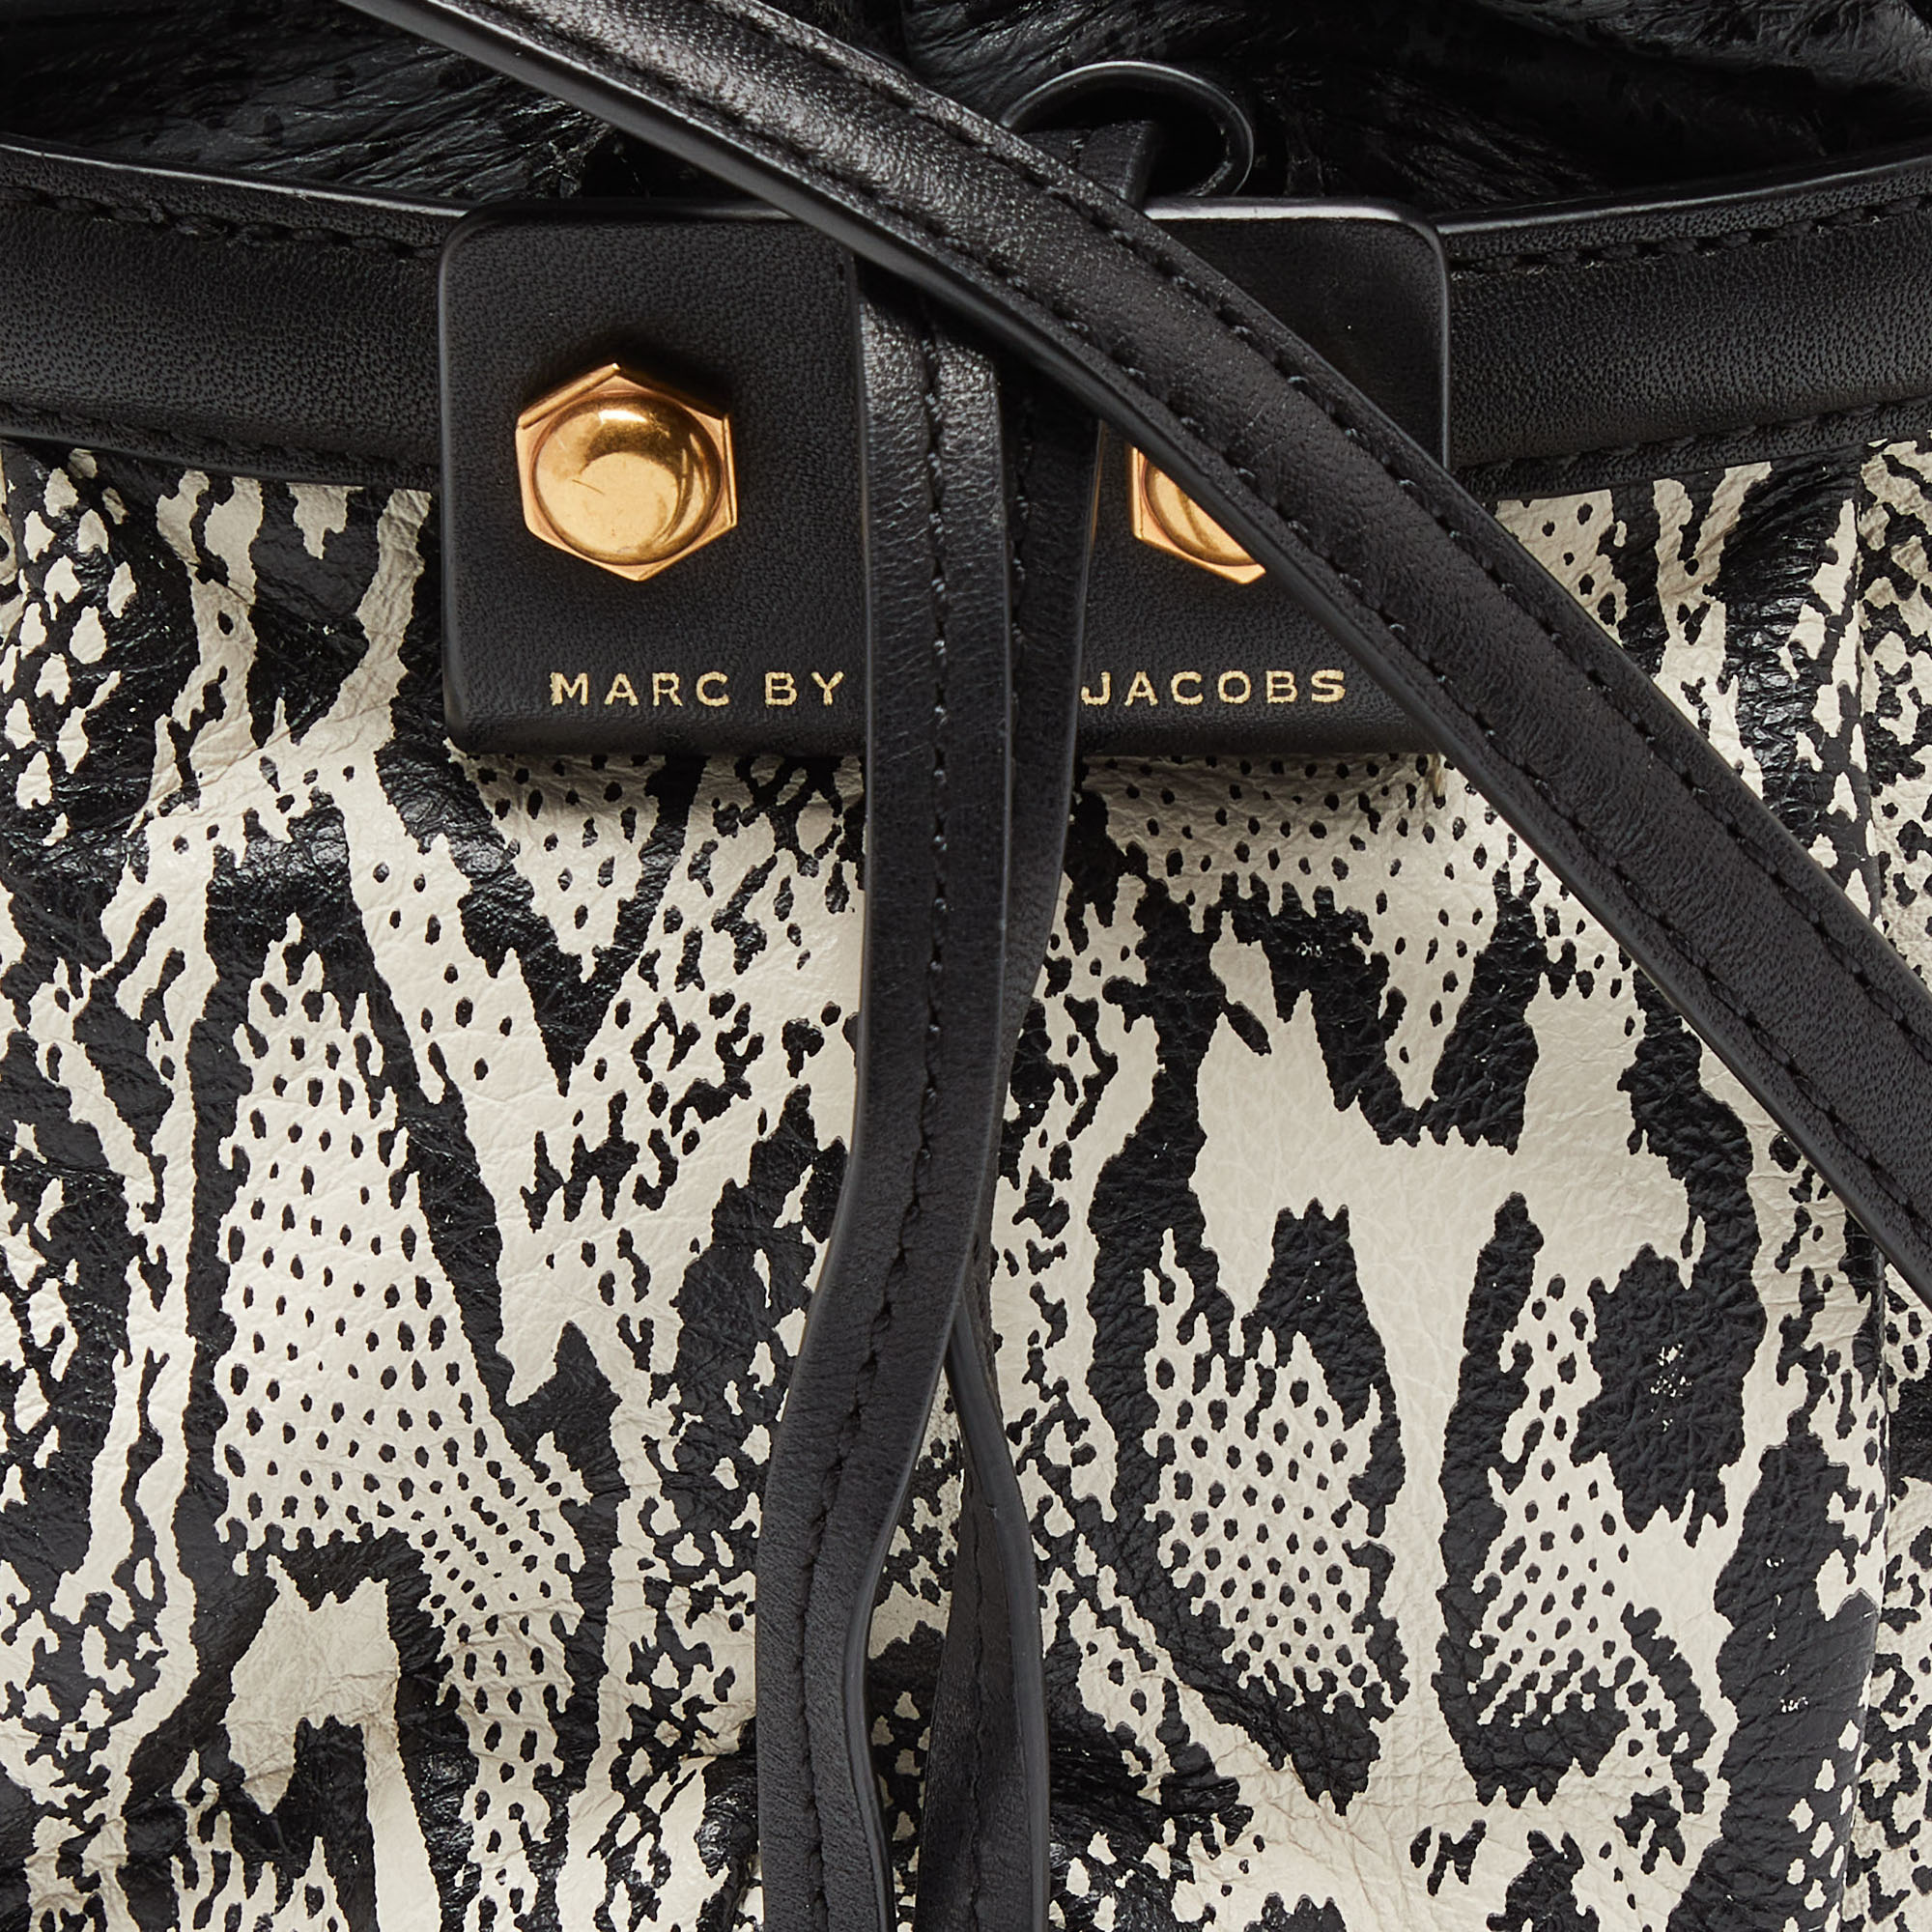 Marc By Marc Jacobs Tri Color Snakes Print Leather Bucket Bag